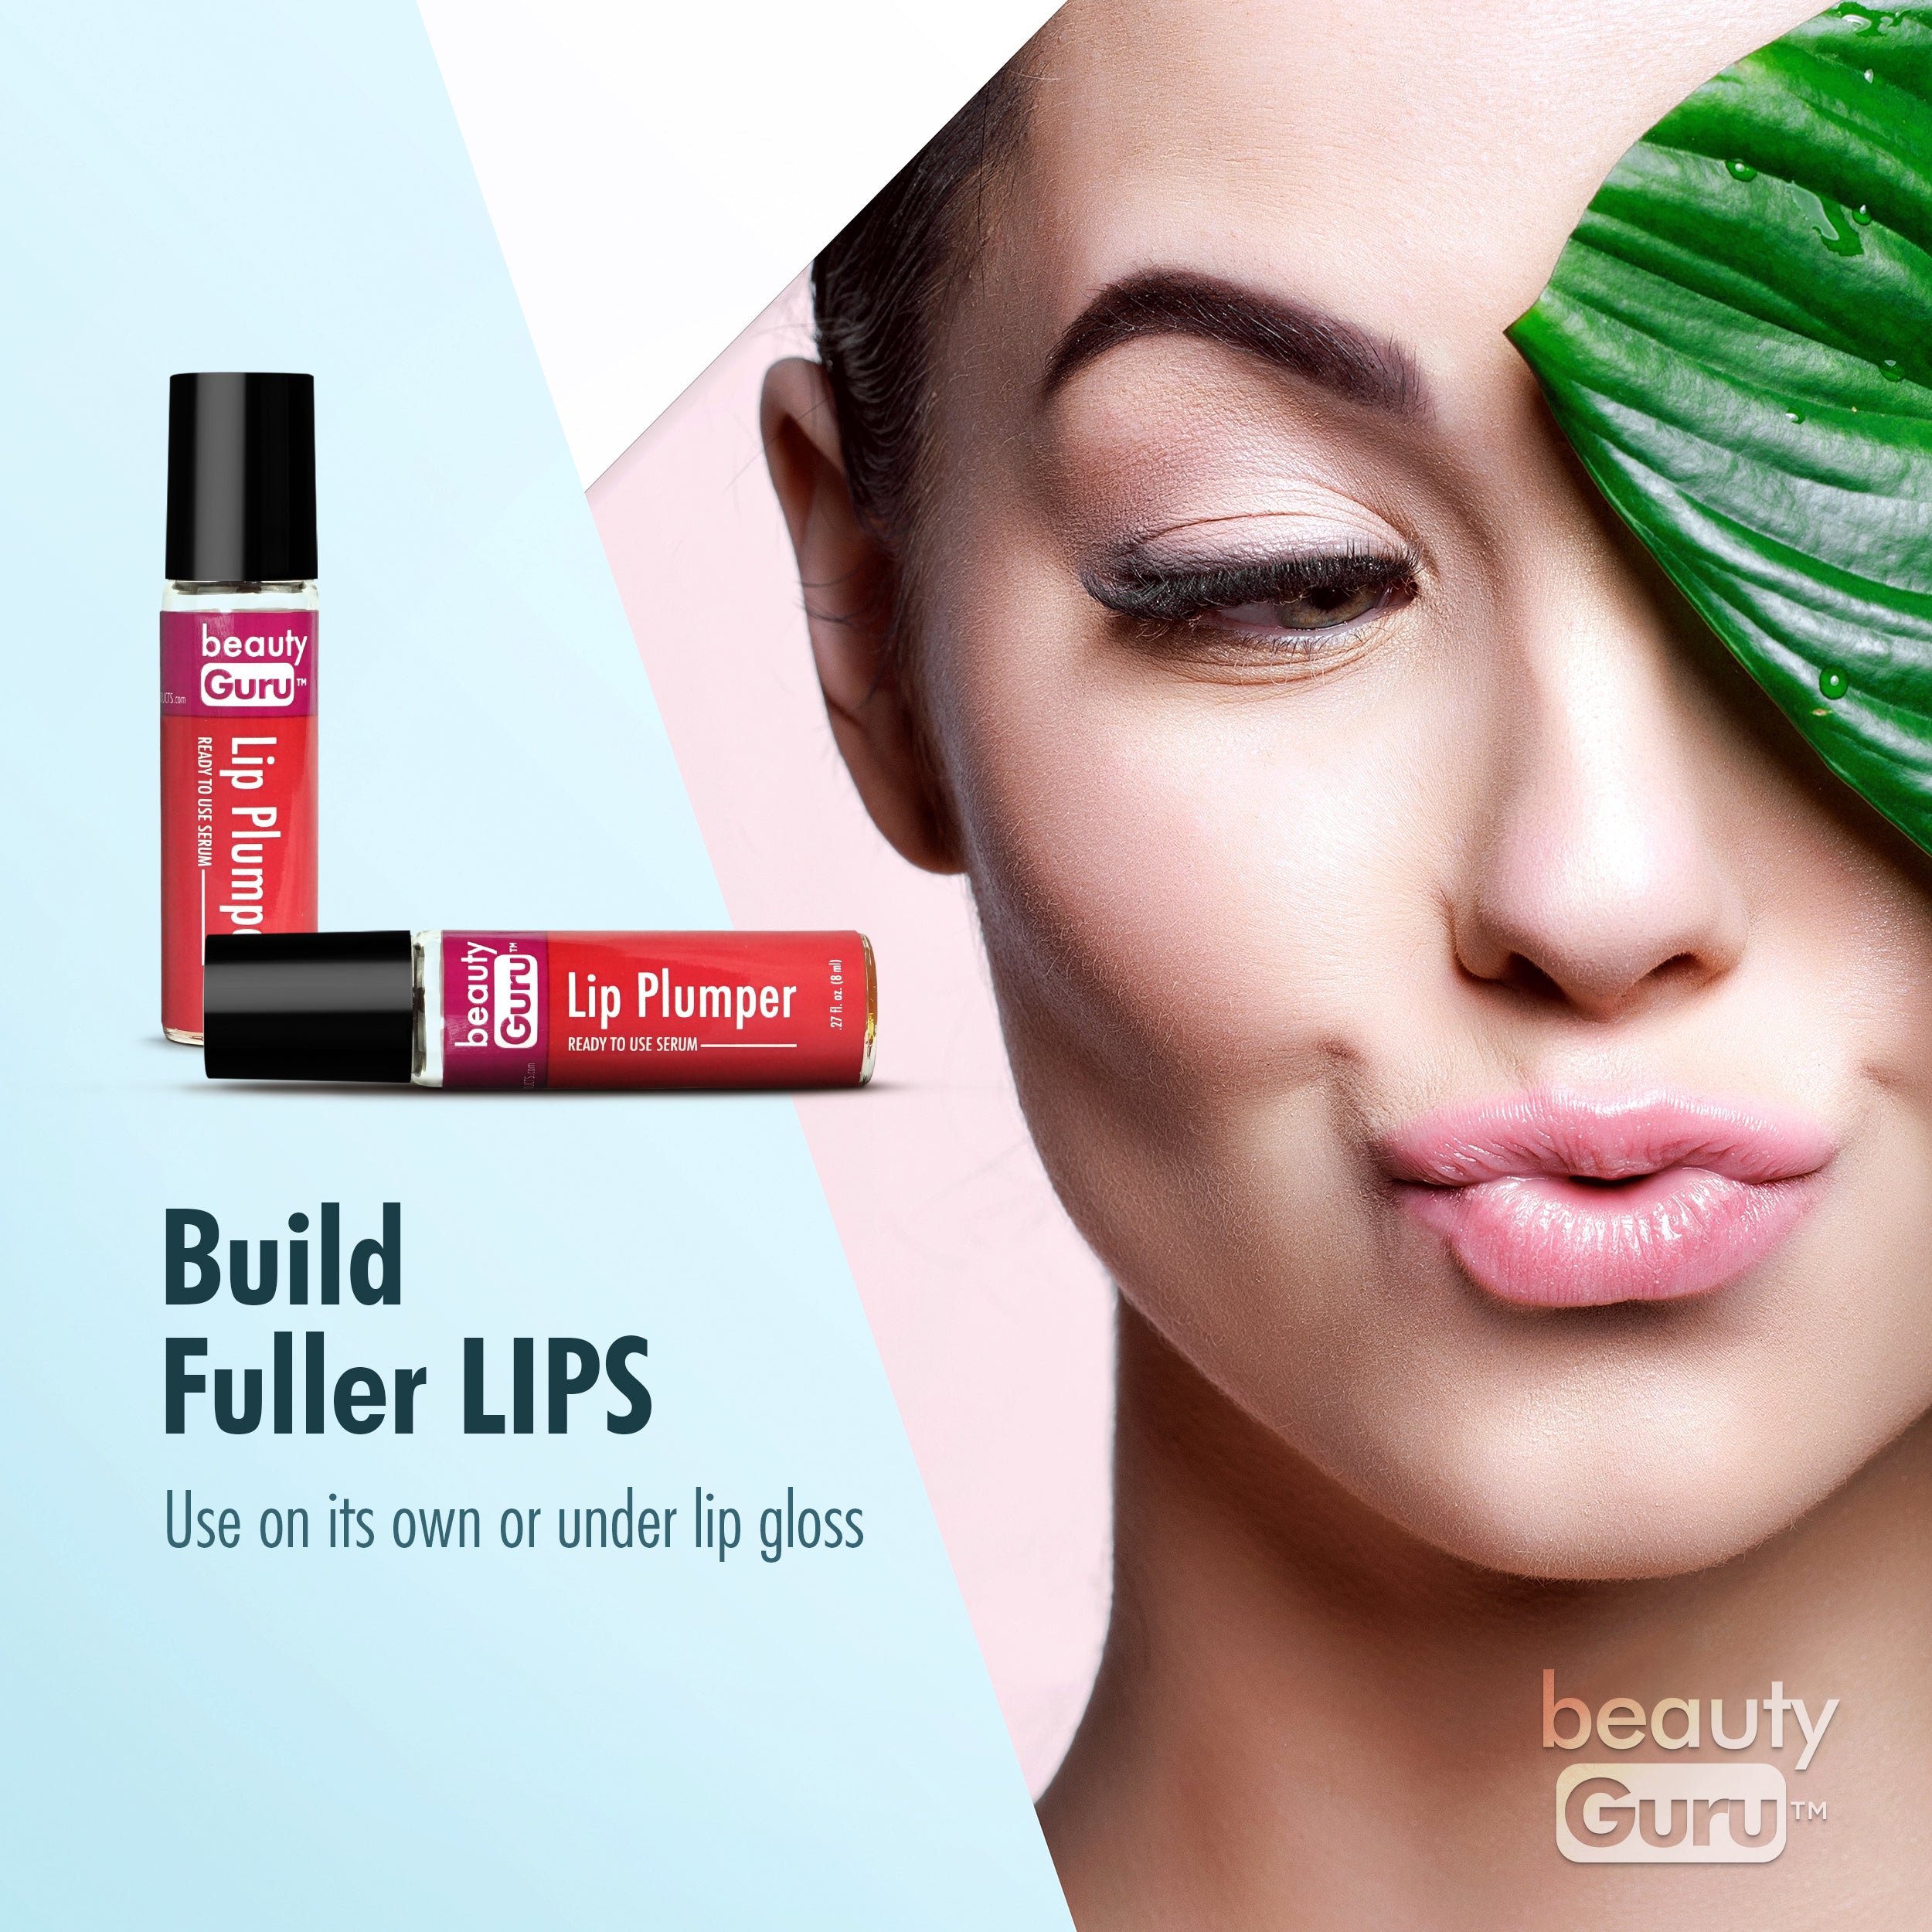 Lip Plumper Serum (Pack of 18)- Wholesale Only, Contact to Purchase